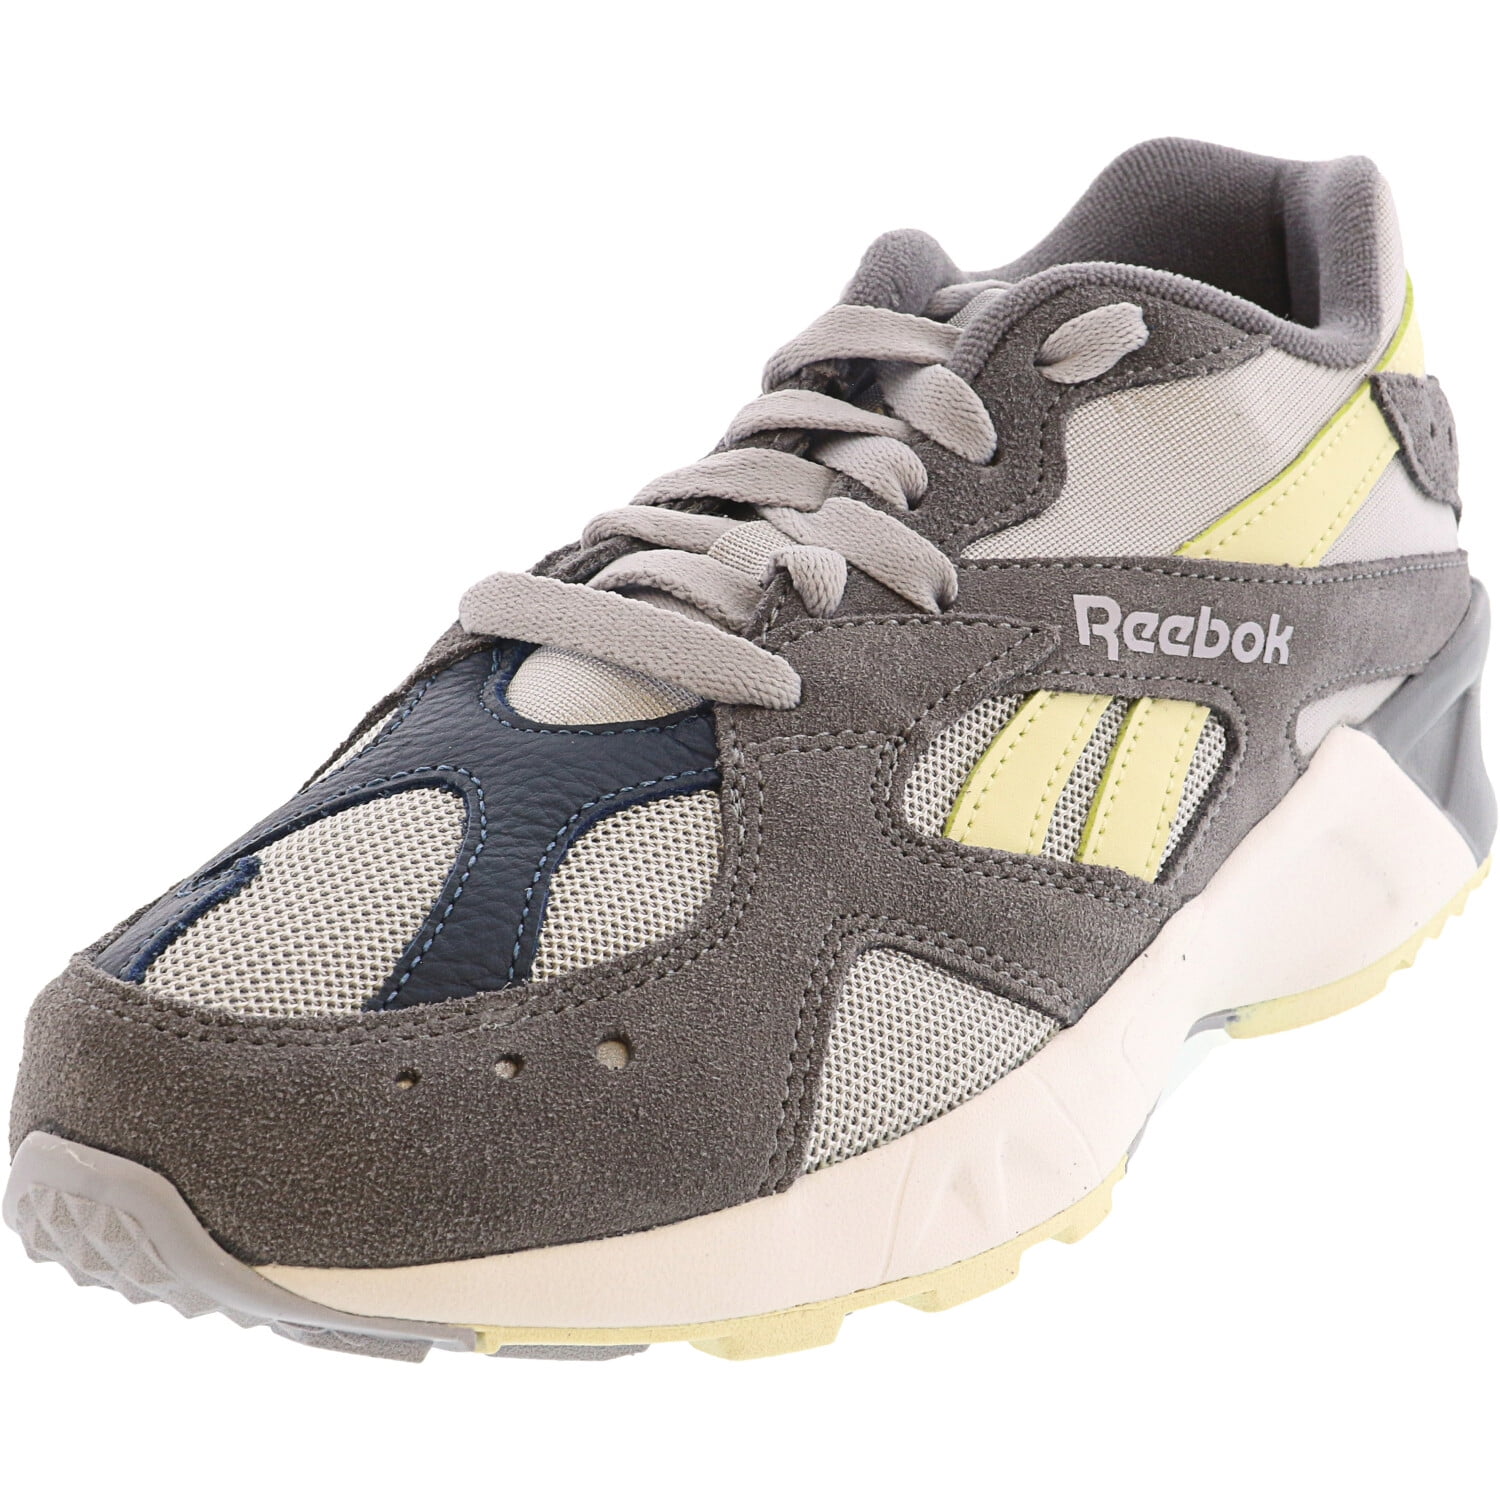 womens reebok classic athletic shoe exotic natural